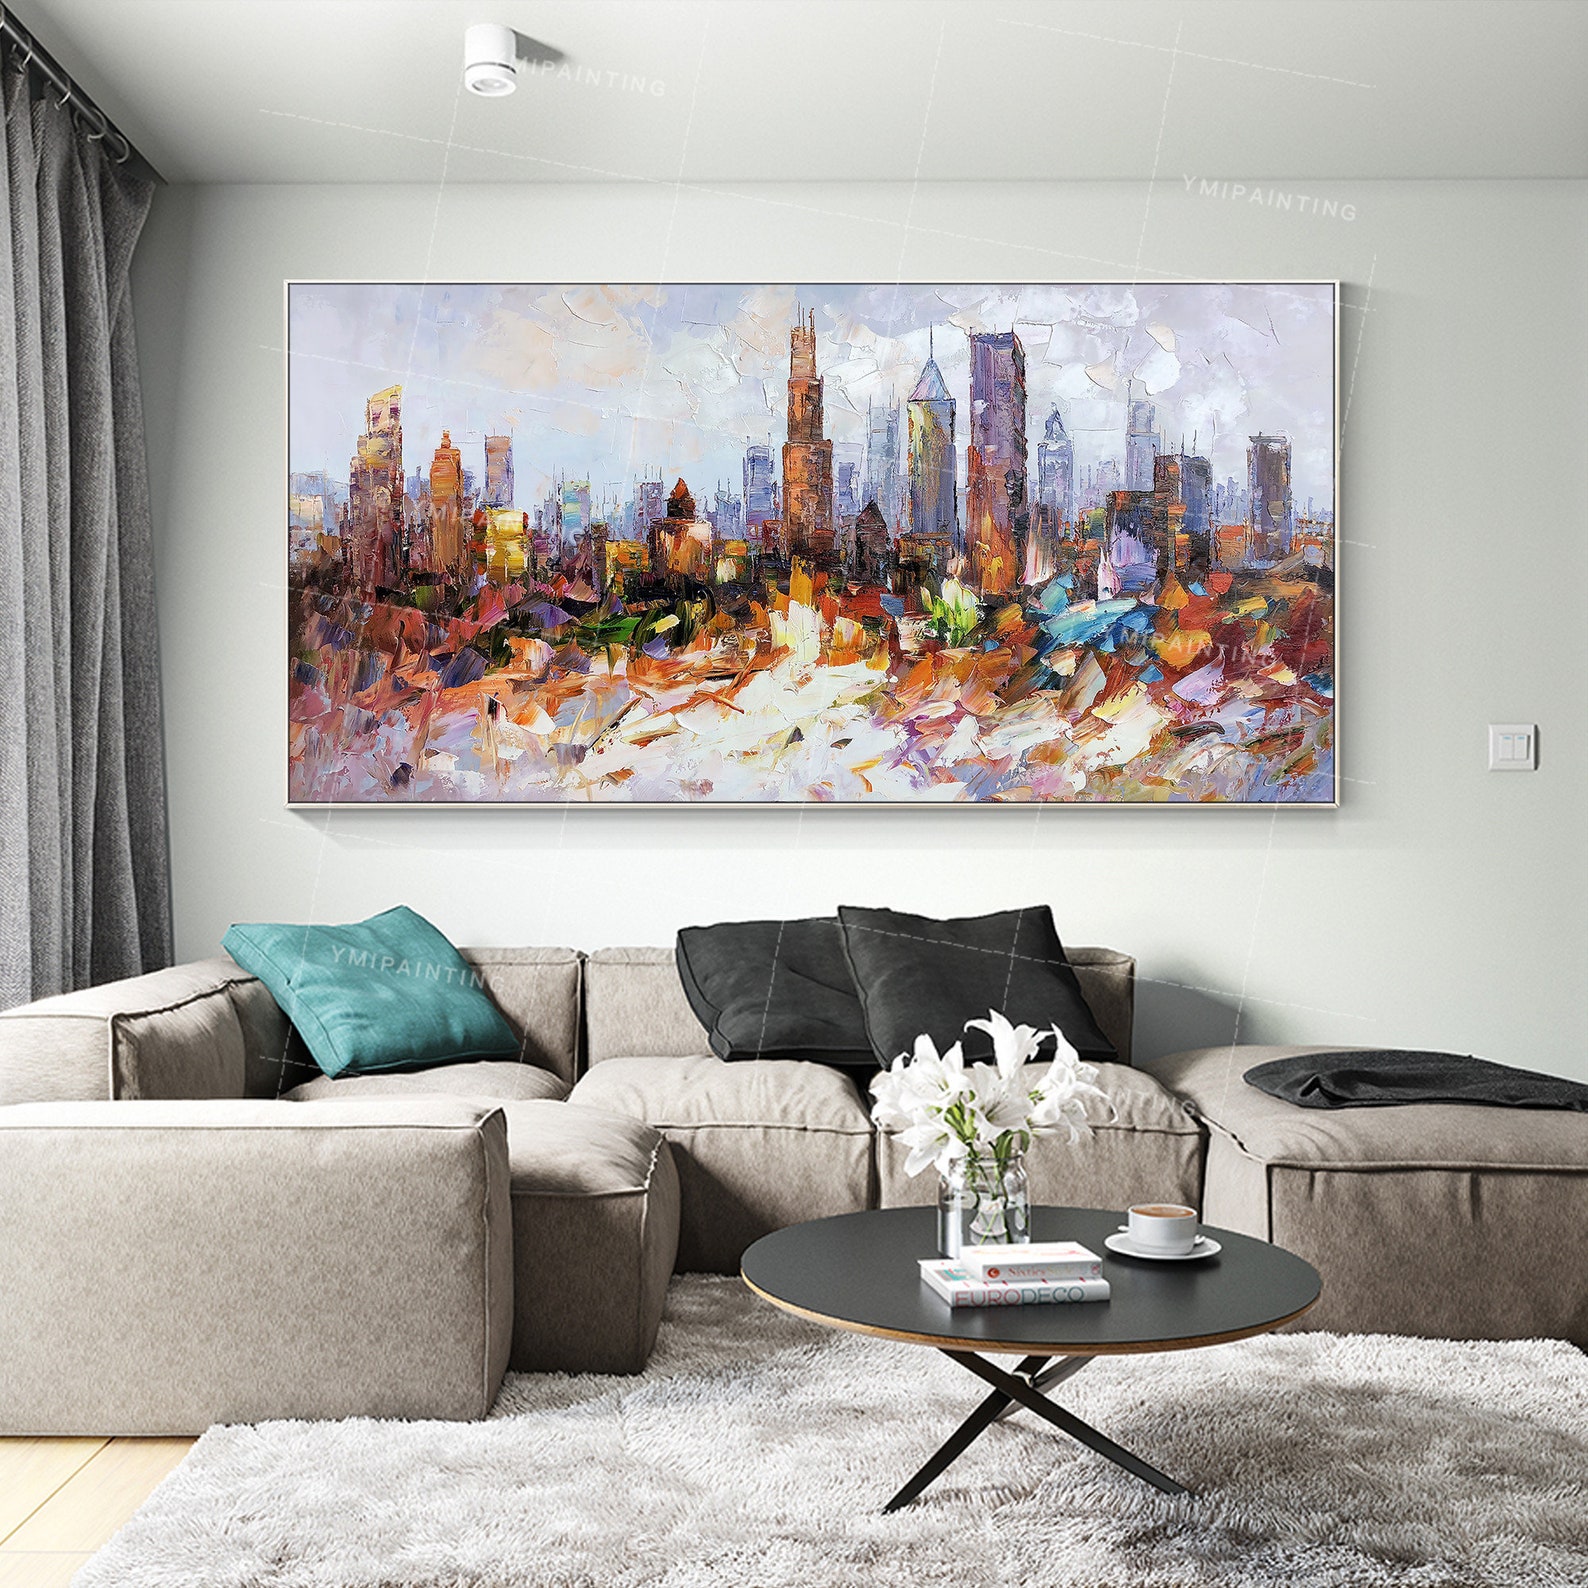 Chicago Painting Framed Wall Art Ymipainting Illinois Skyline | Etsy